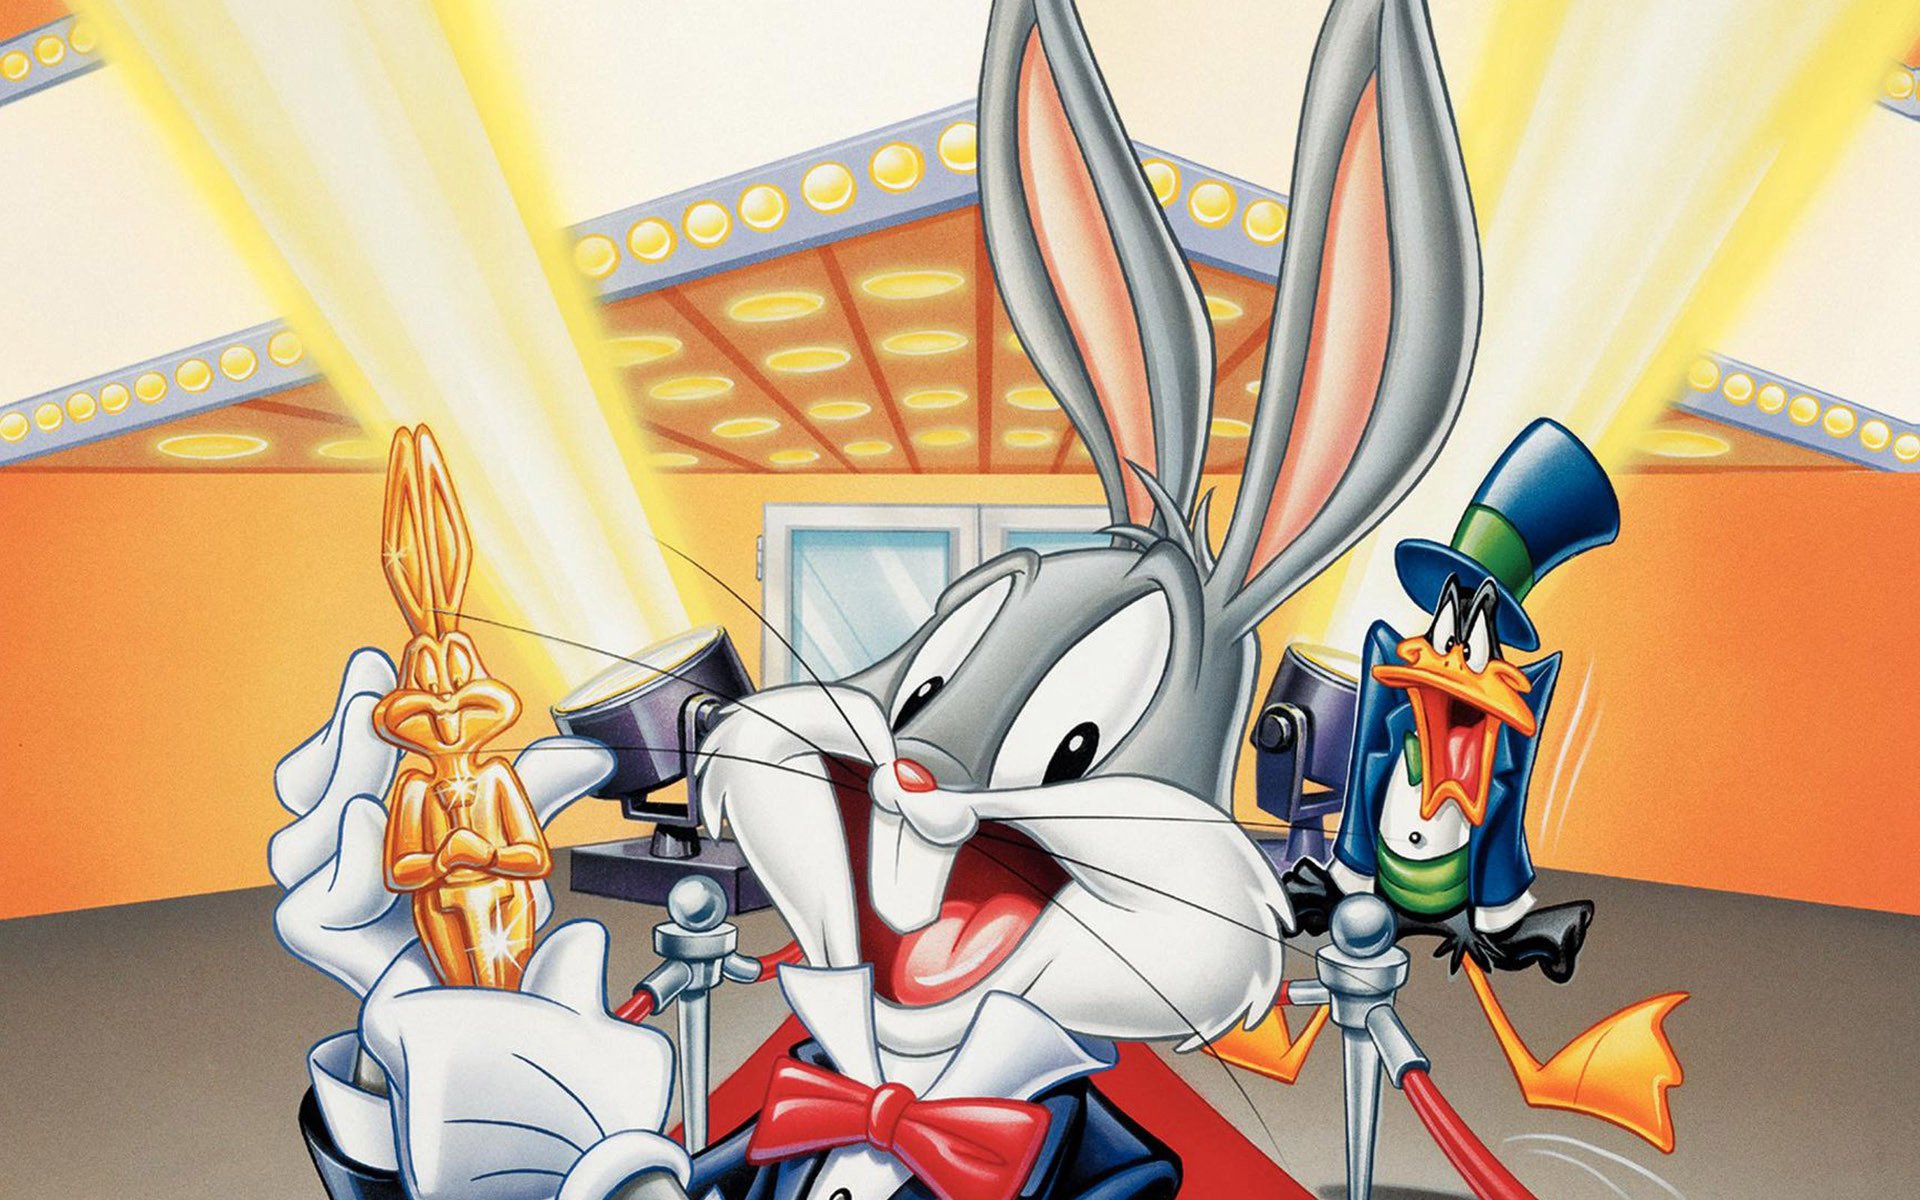 Cartoons Bugs Bunny And Daffy Duck Looney Tunes Hd Wallpaper 1920x1200.